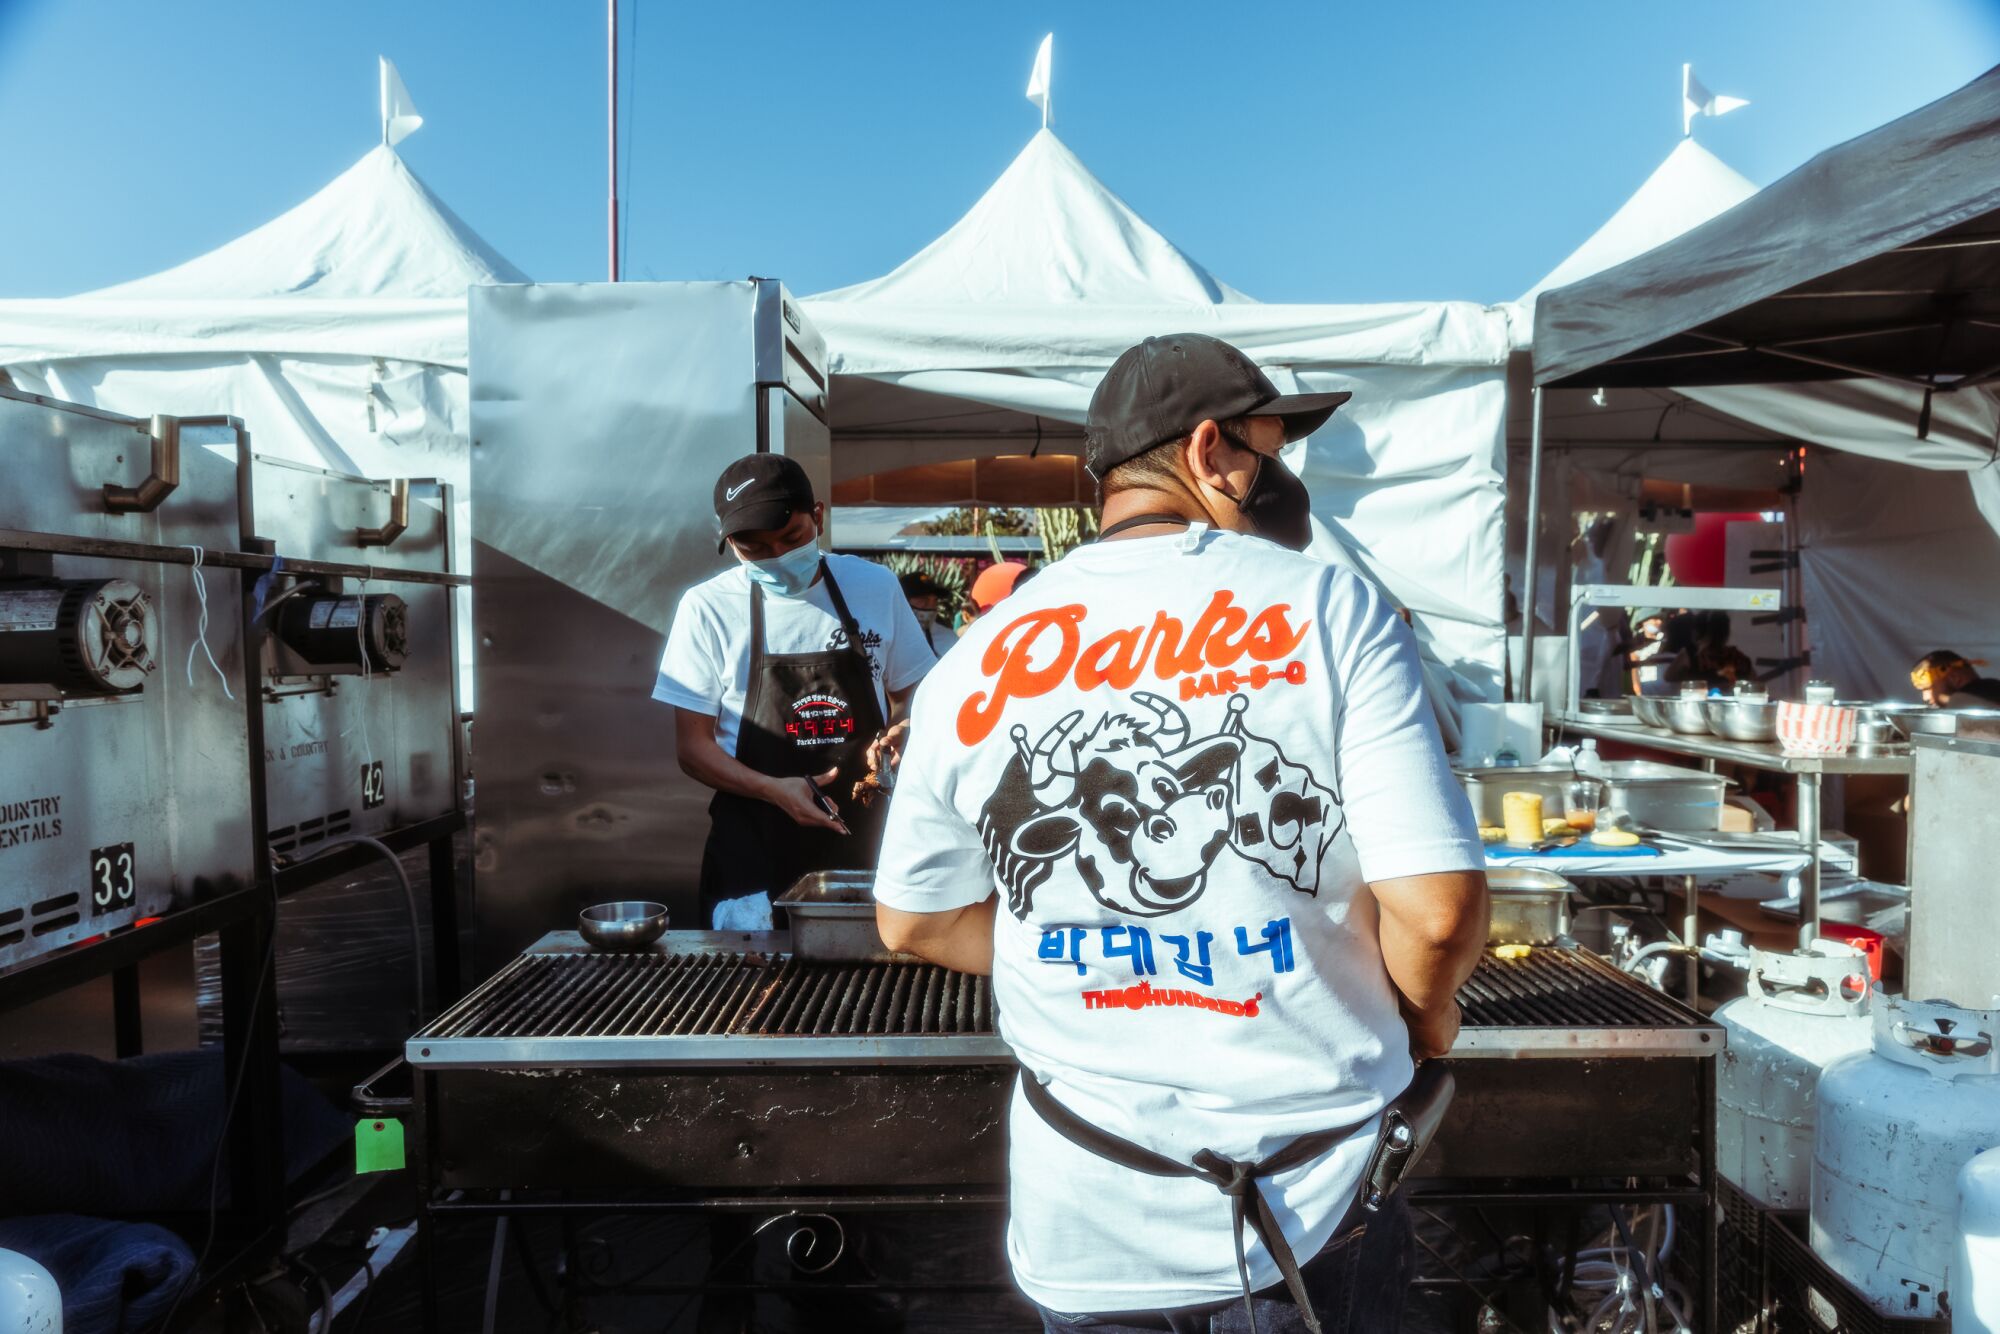 A man in a Park BBQ T-shirt stands on a grill.